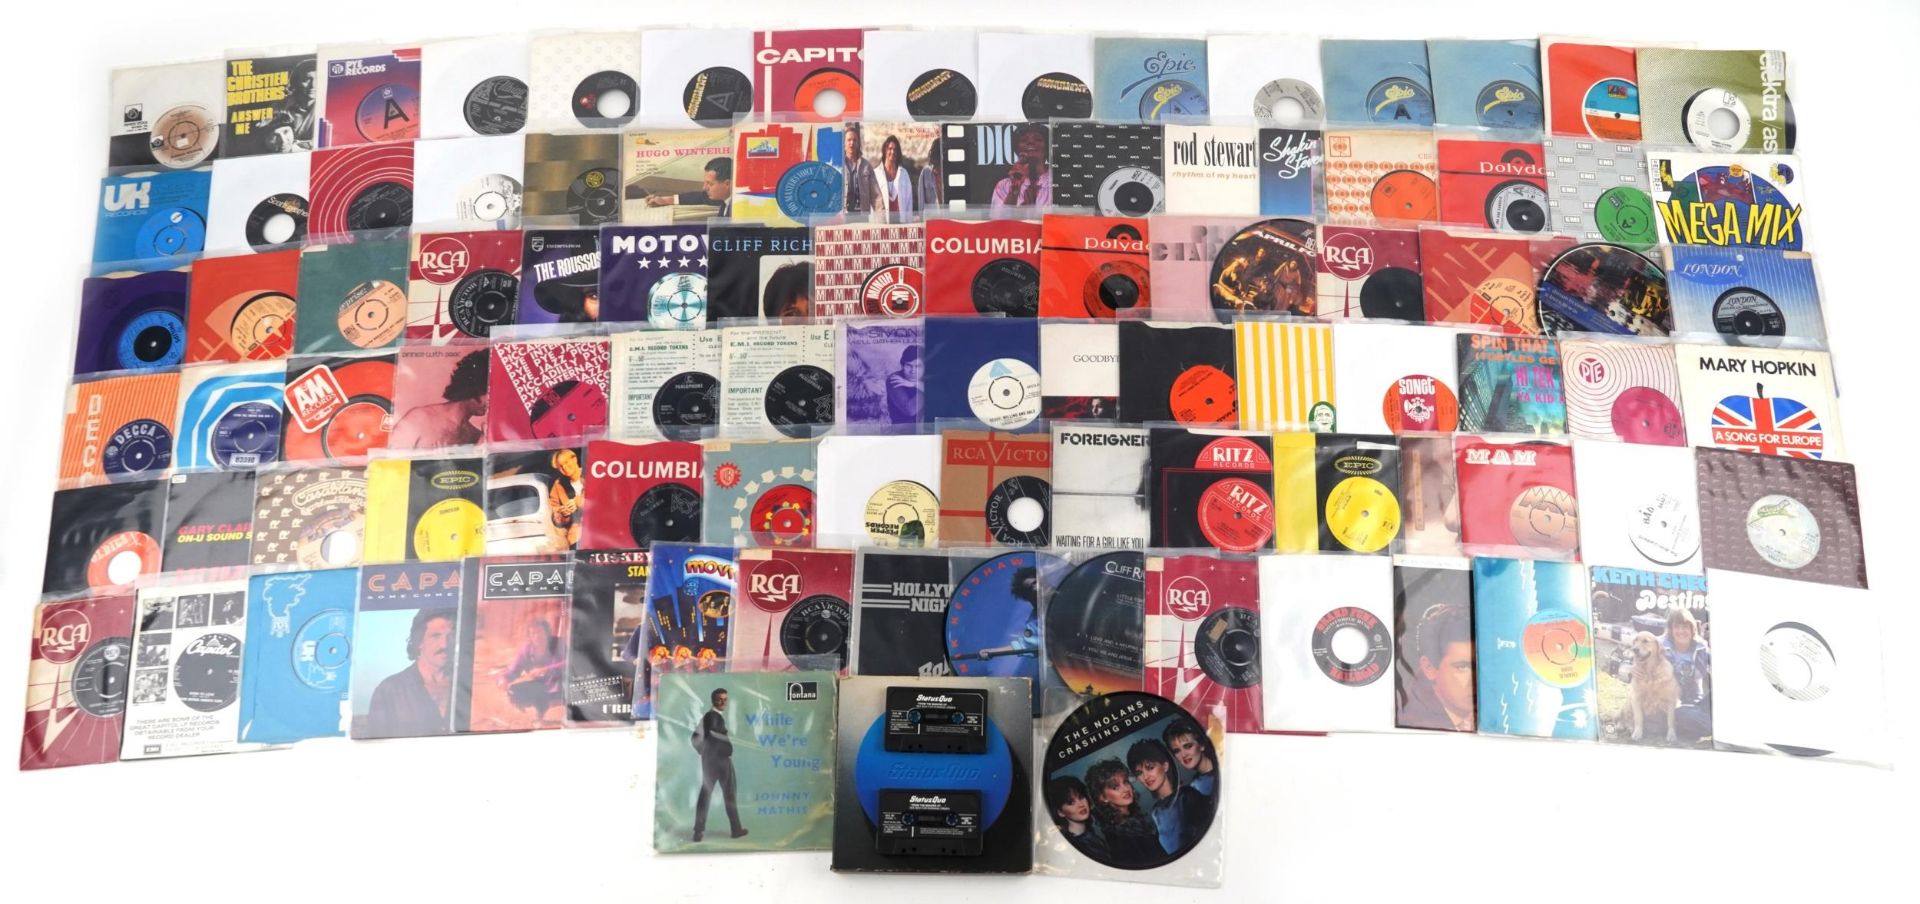 45rpm records including Status Quo, Cliff Richard and Baron Longfellow : For further information